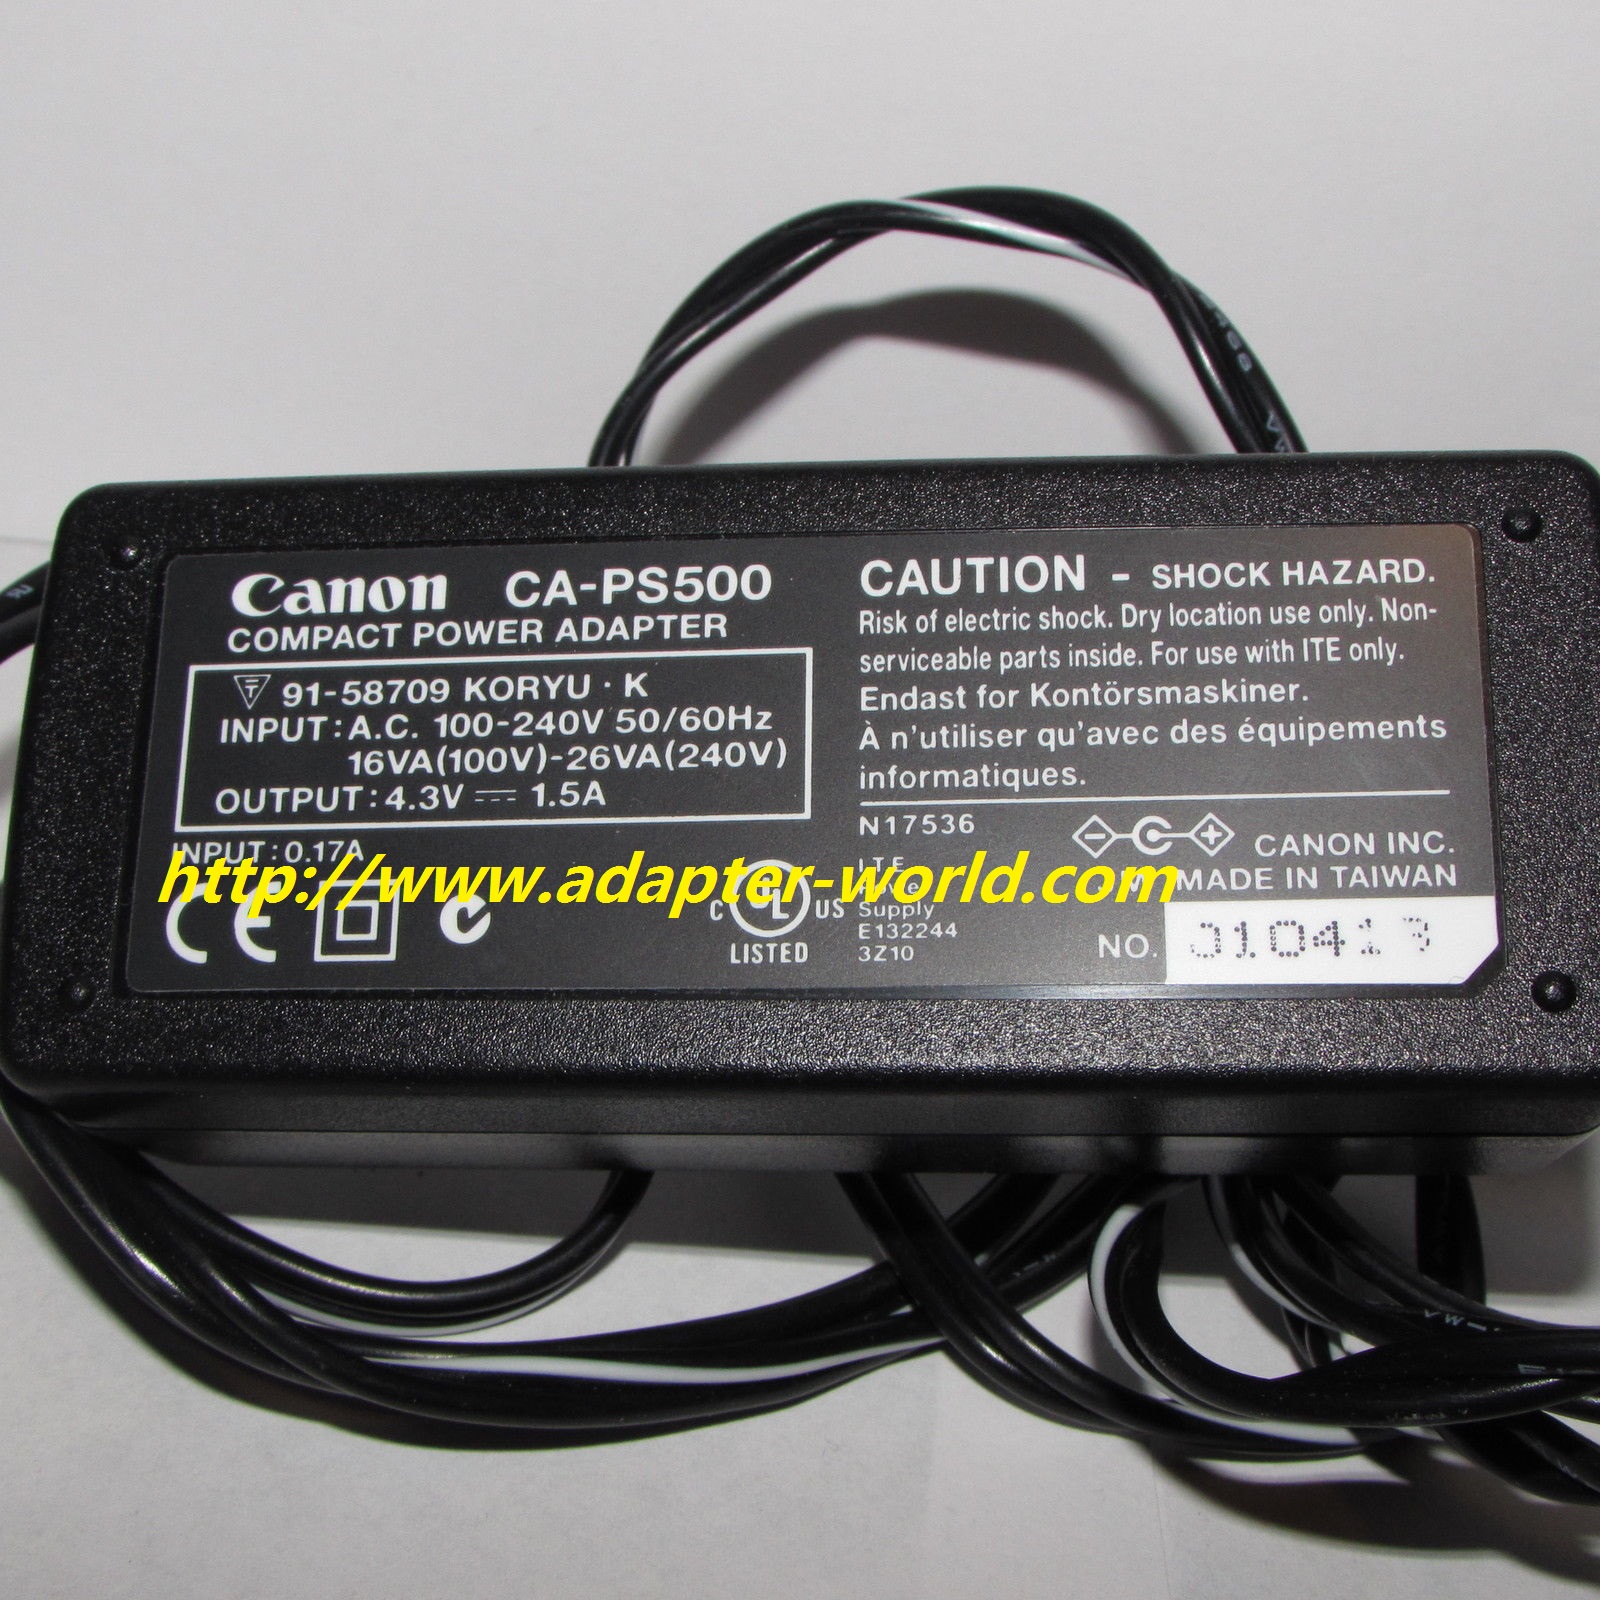 *100% Brand NEW* Canon CA-PS500 4.3V 1.5A A S105048 Compact AC Power Adapter Power Supply Free Shipping! - Click Image to Close